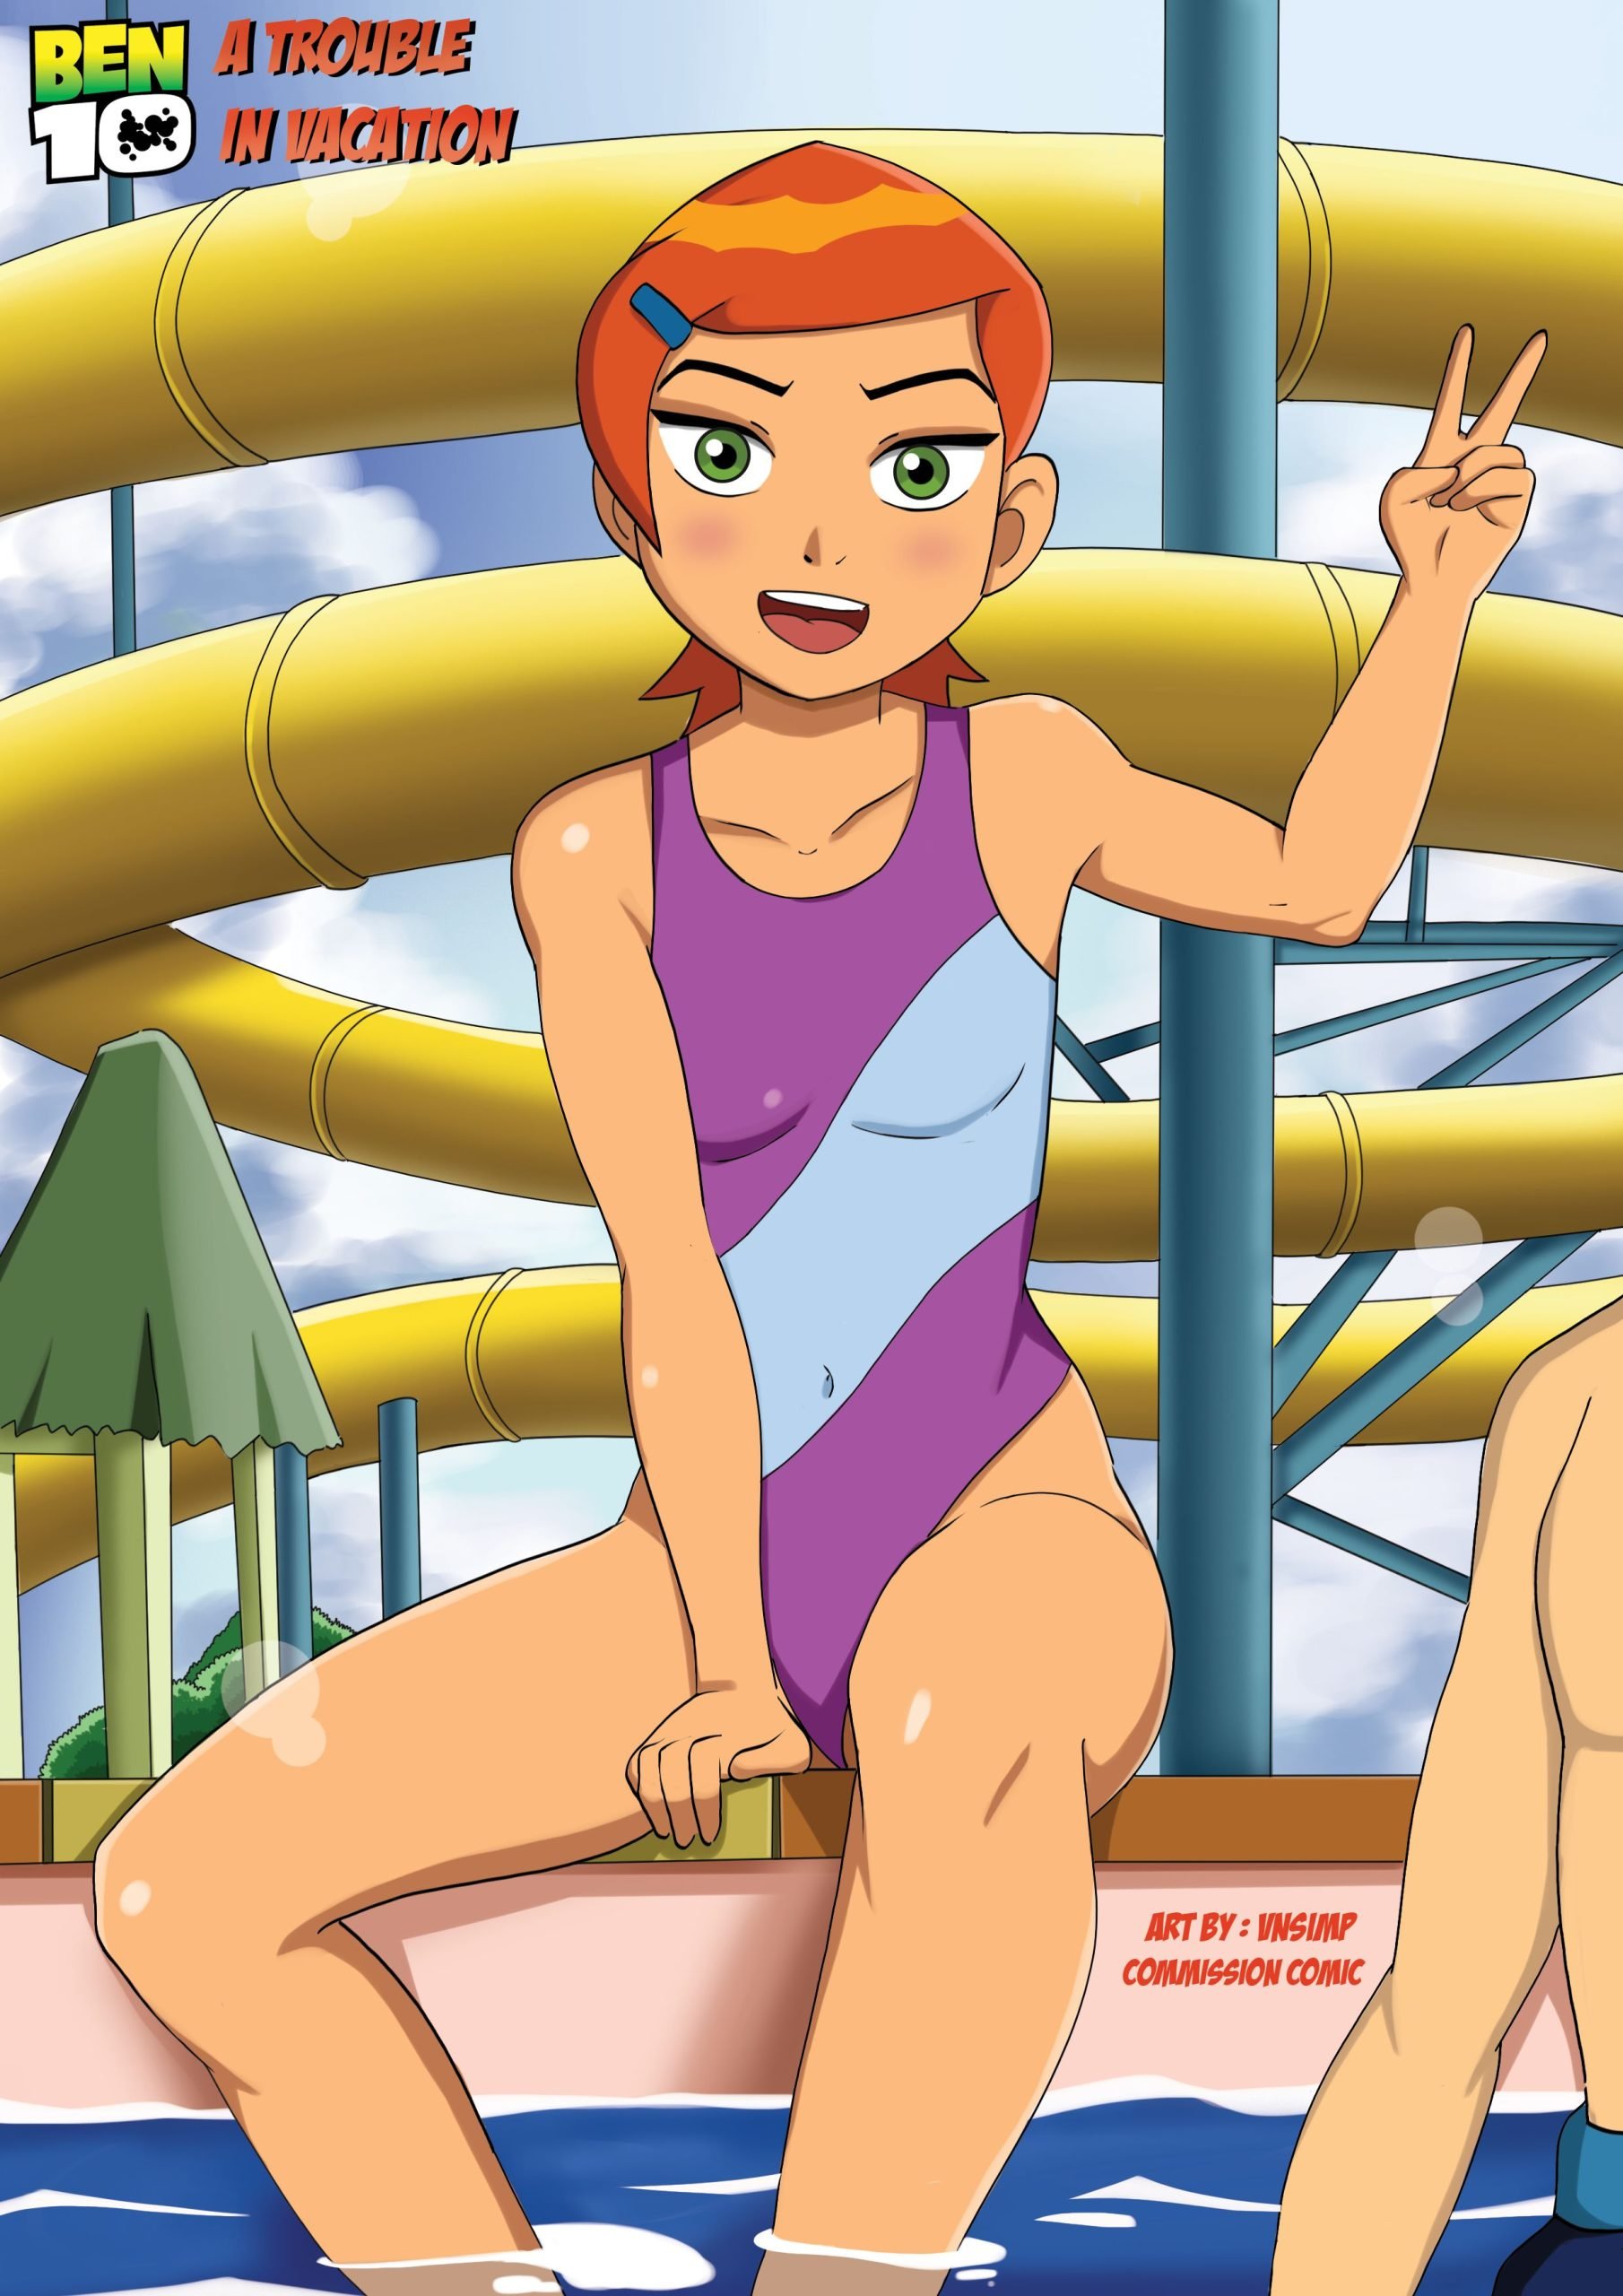 A Trouble in Vacation (Ben 10) VN Simp Porn Comic